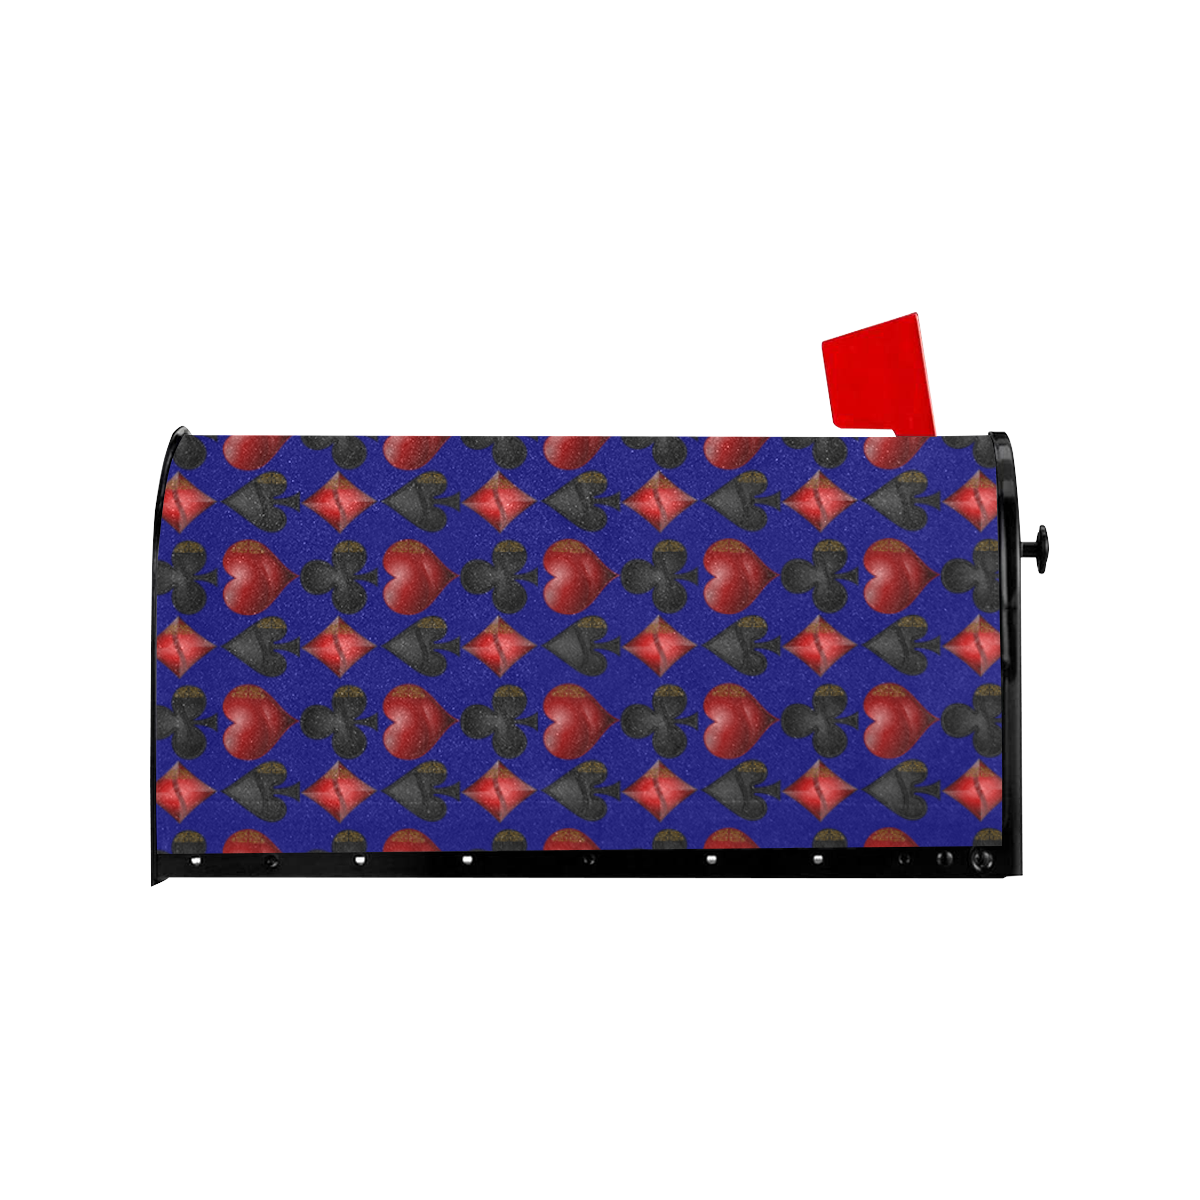 Las Vegas Black and Red Casino Poker Card Shapes on Blue Mailbox Cover